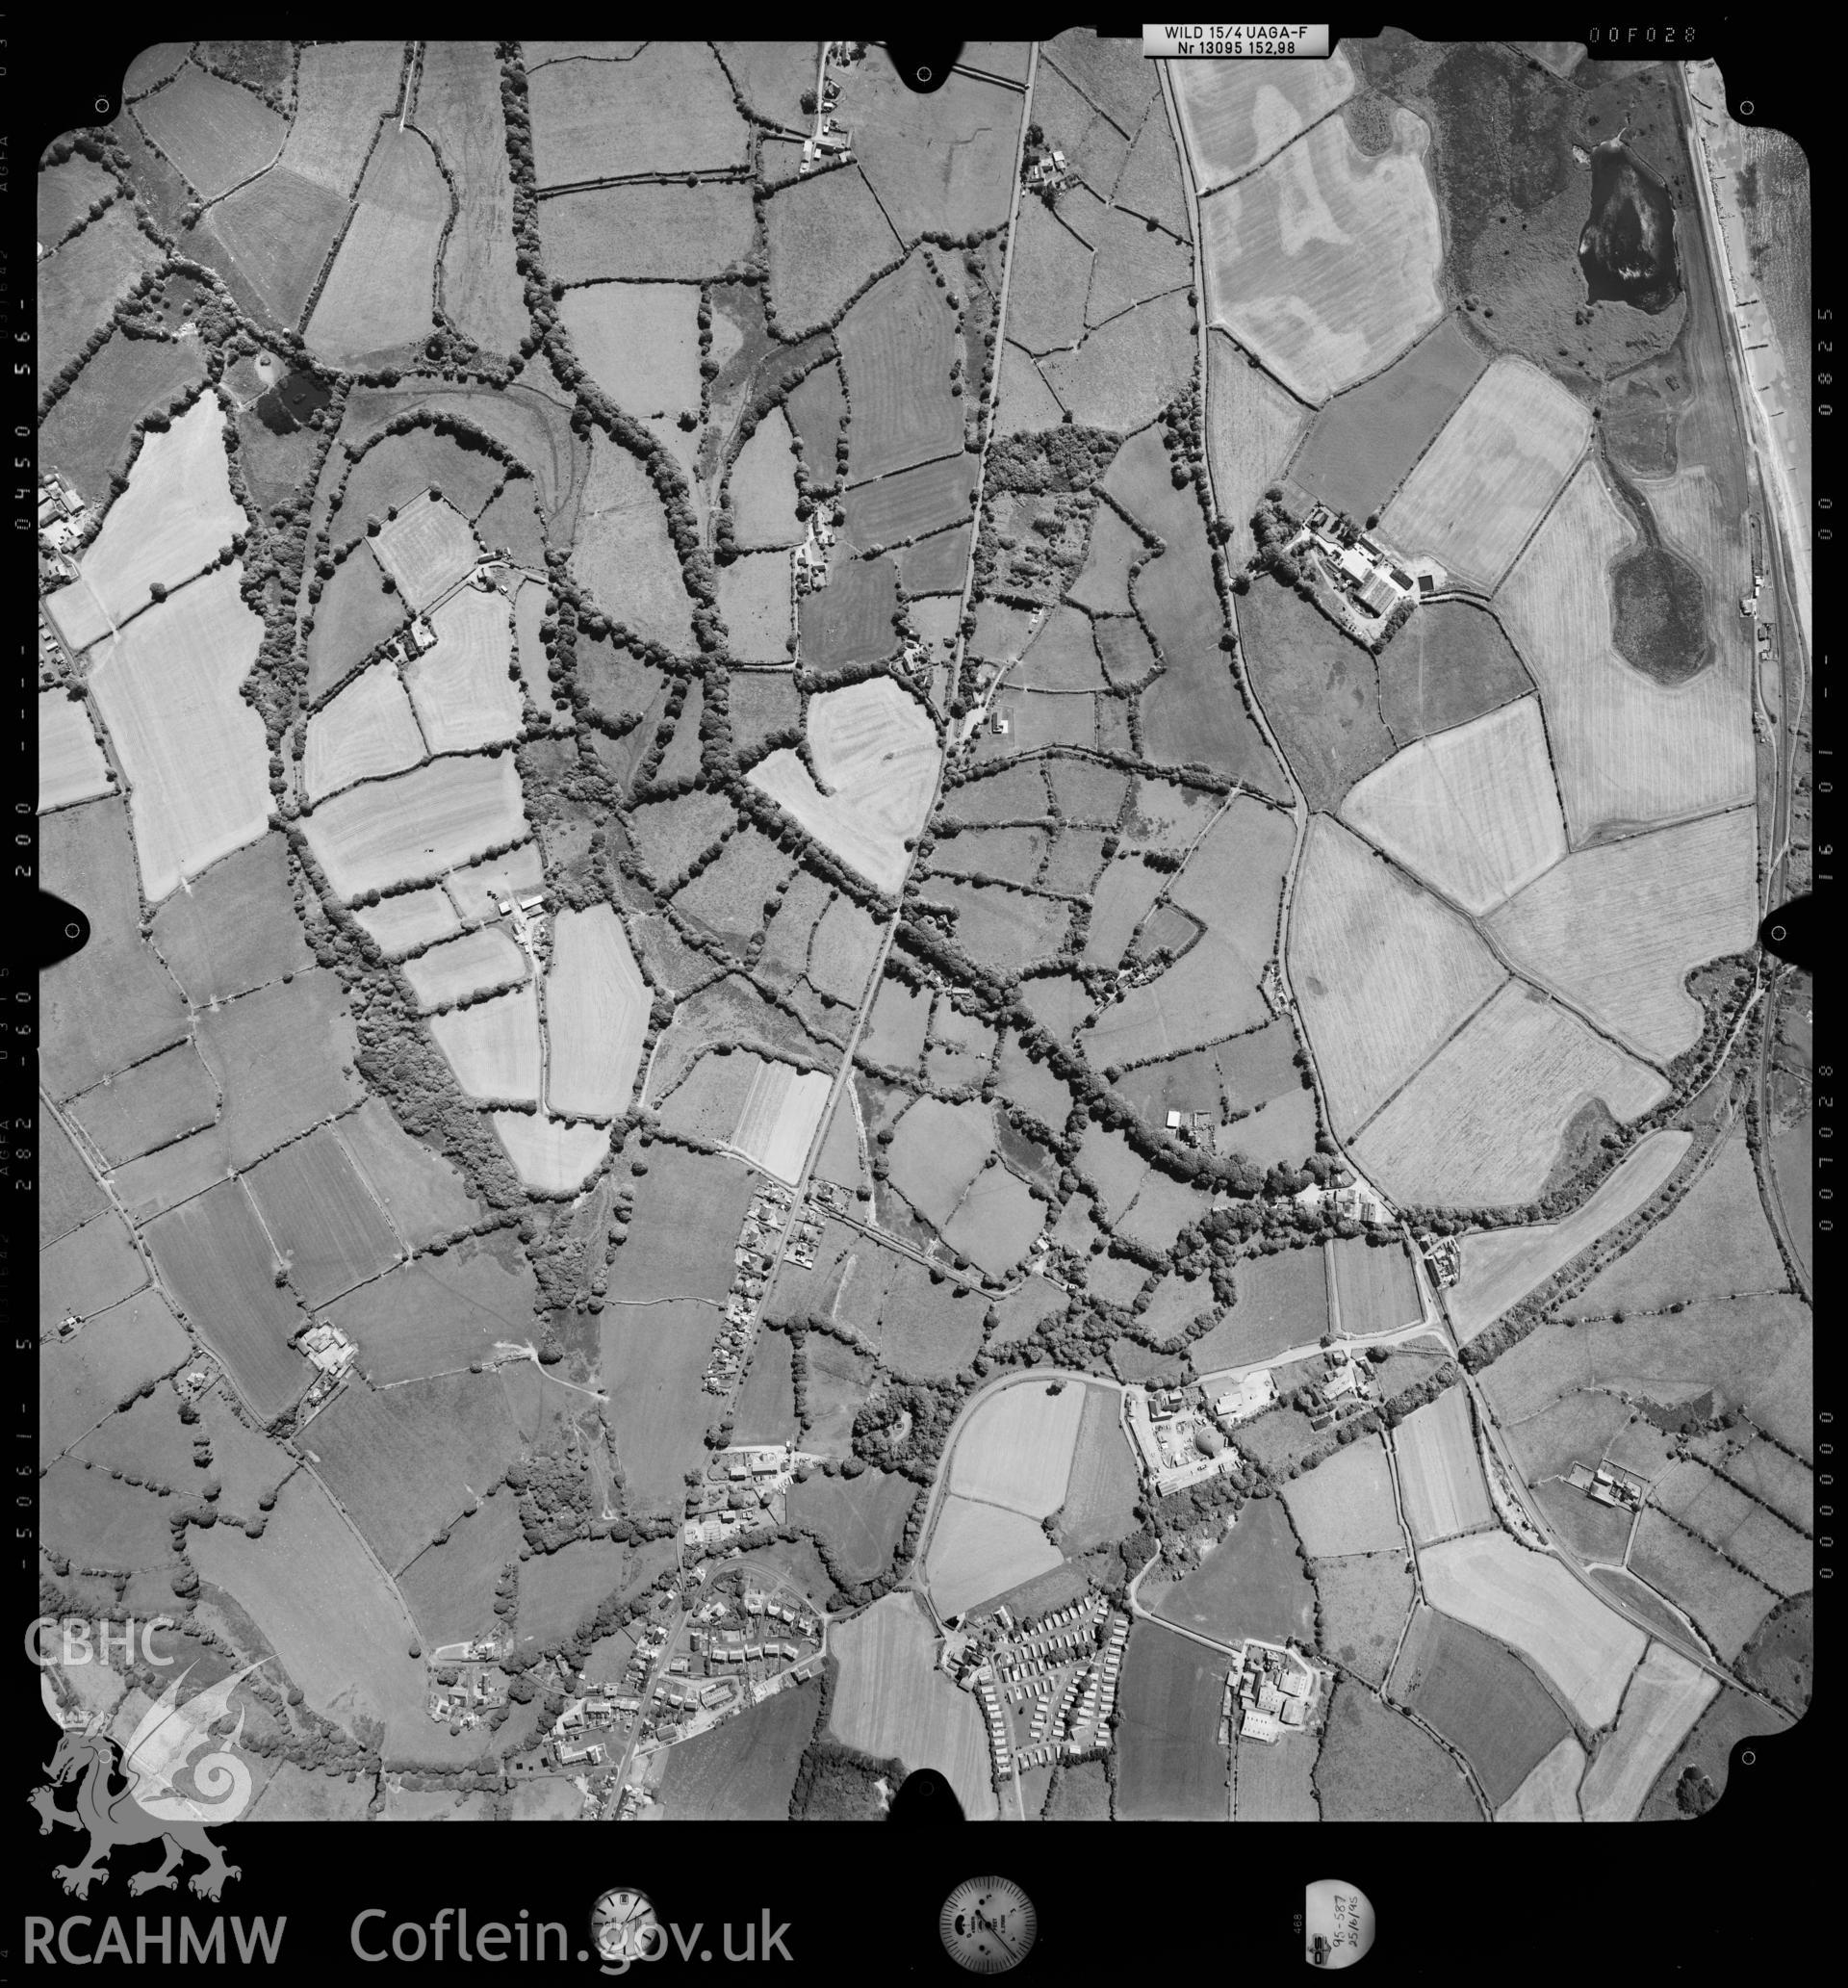 Digitized copy of an aerial photograph showing the South Lleyn area, taken by Ordnance Survey, 1995.